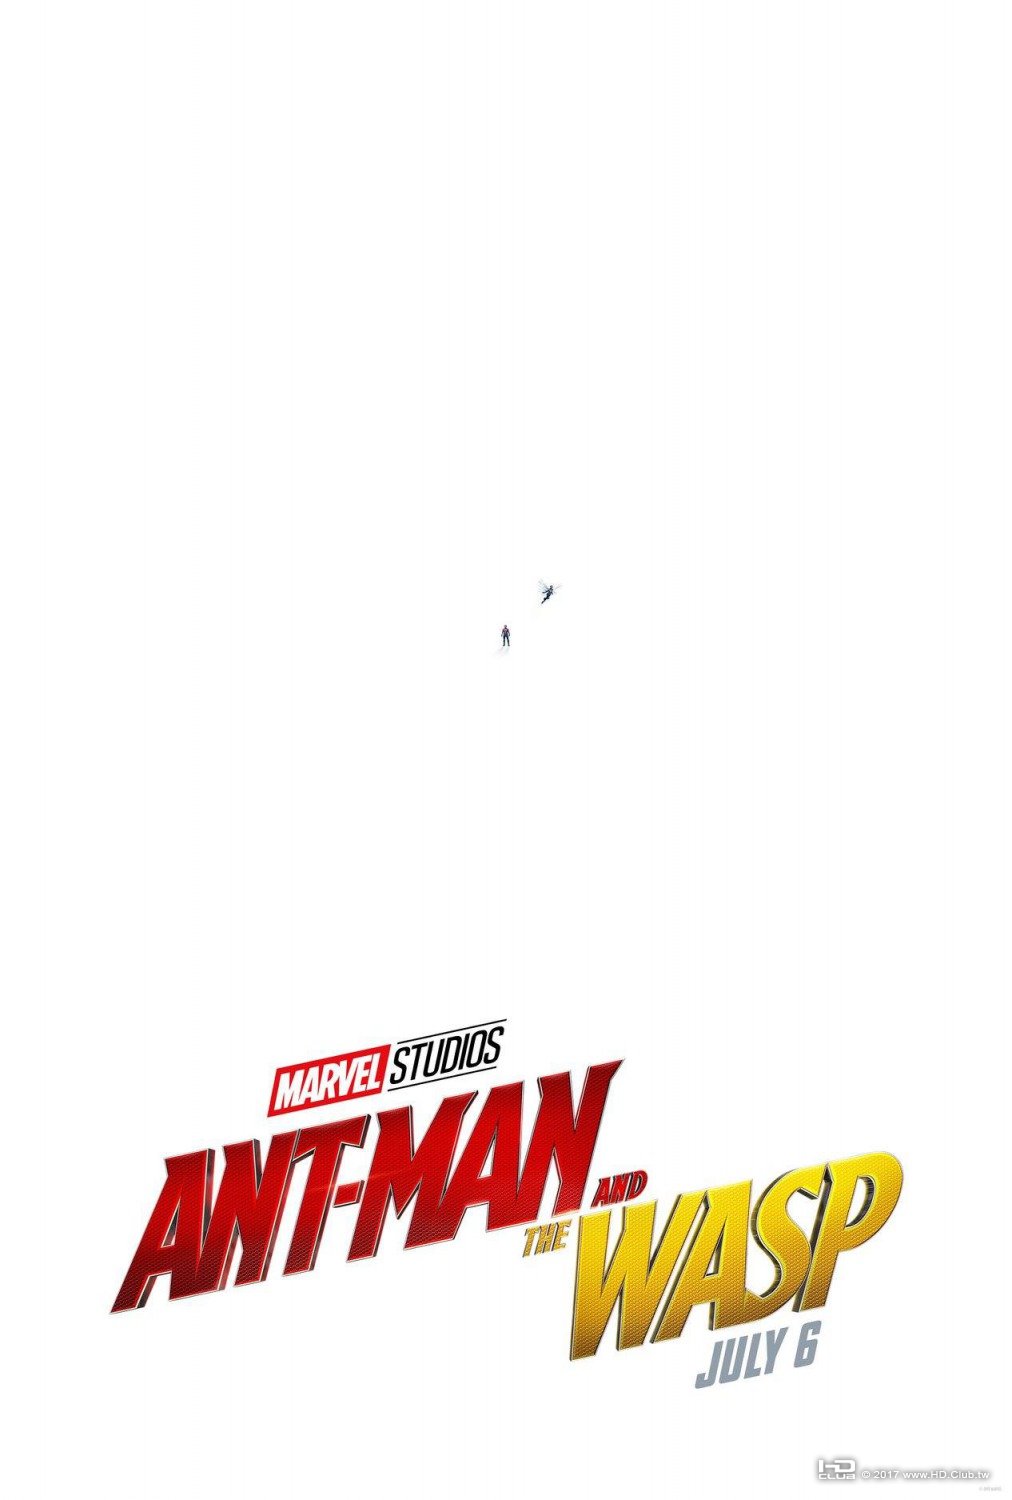 antman_and_the_wasp_xlg.jpg